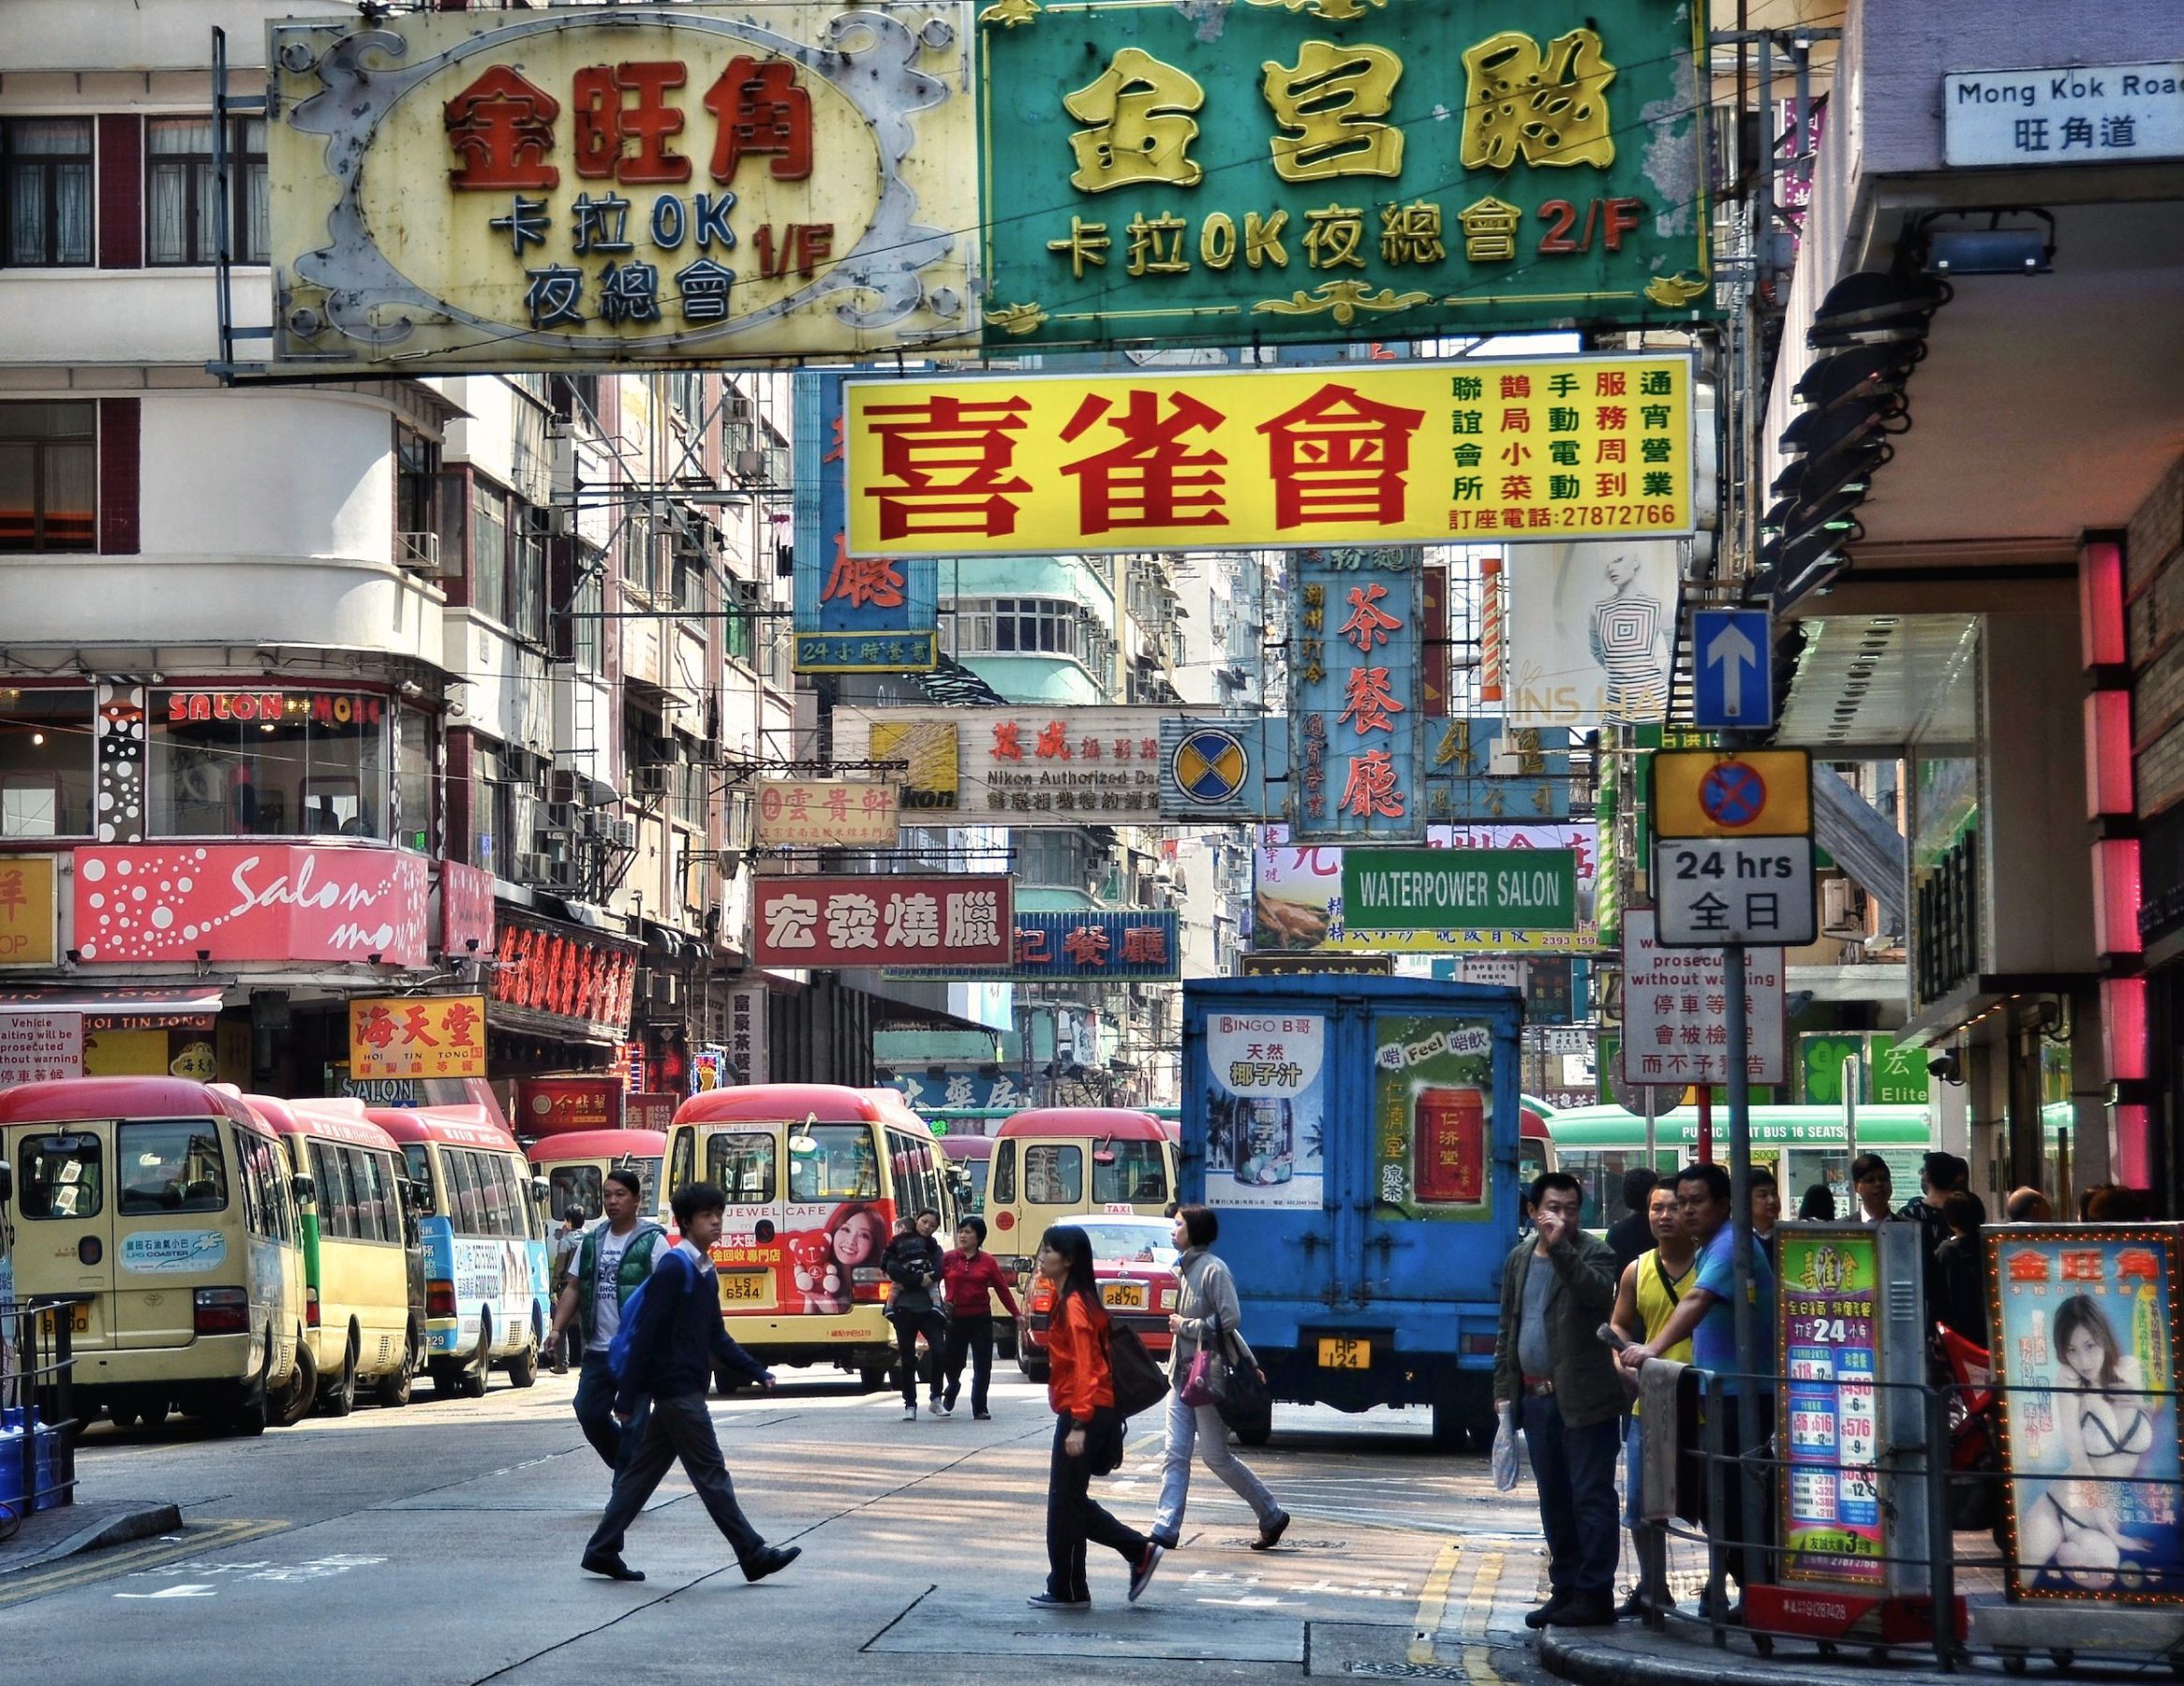 Busy street scene with many neon signs,buses and people crossing the streets